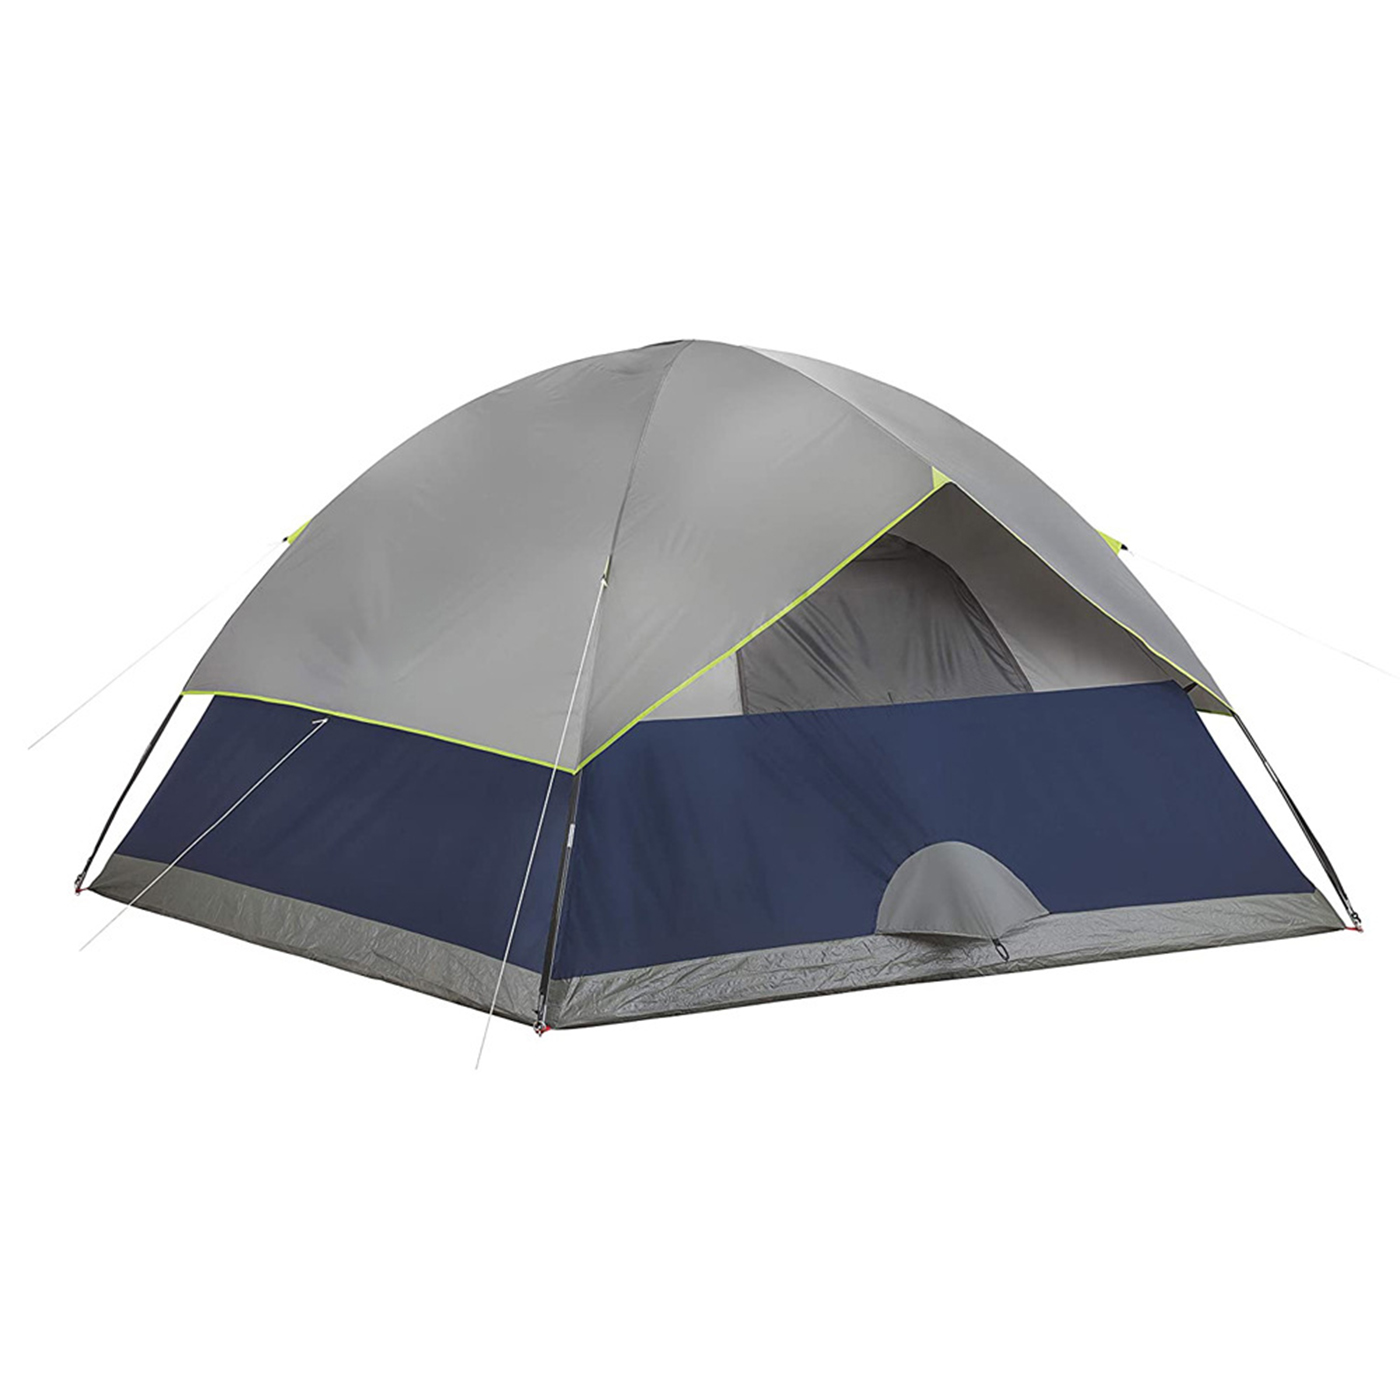 2 Person Camping Dome Tent1